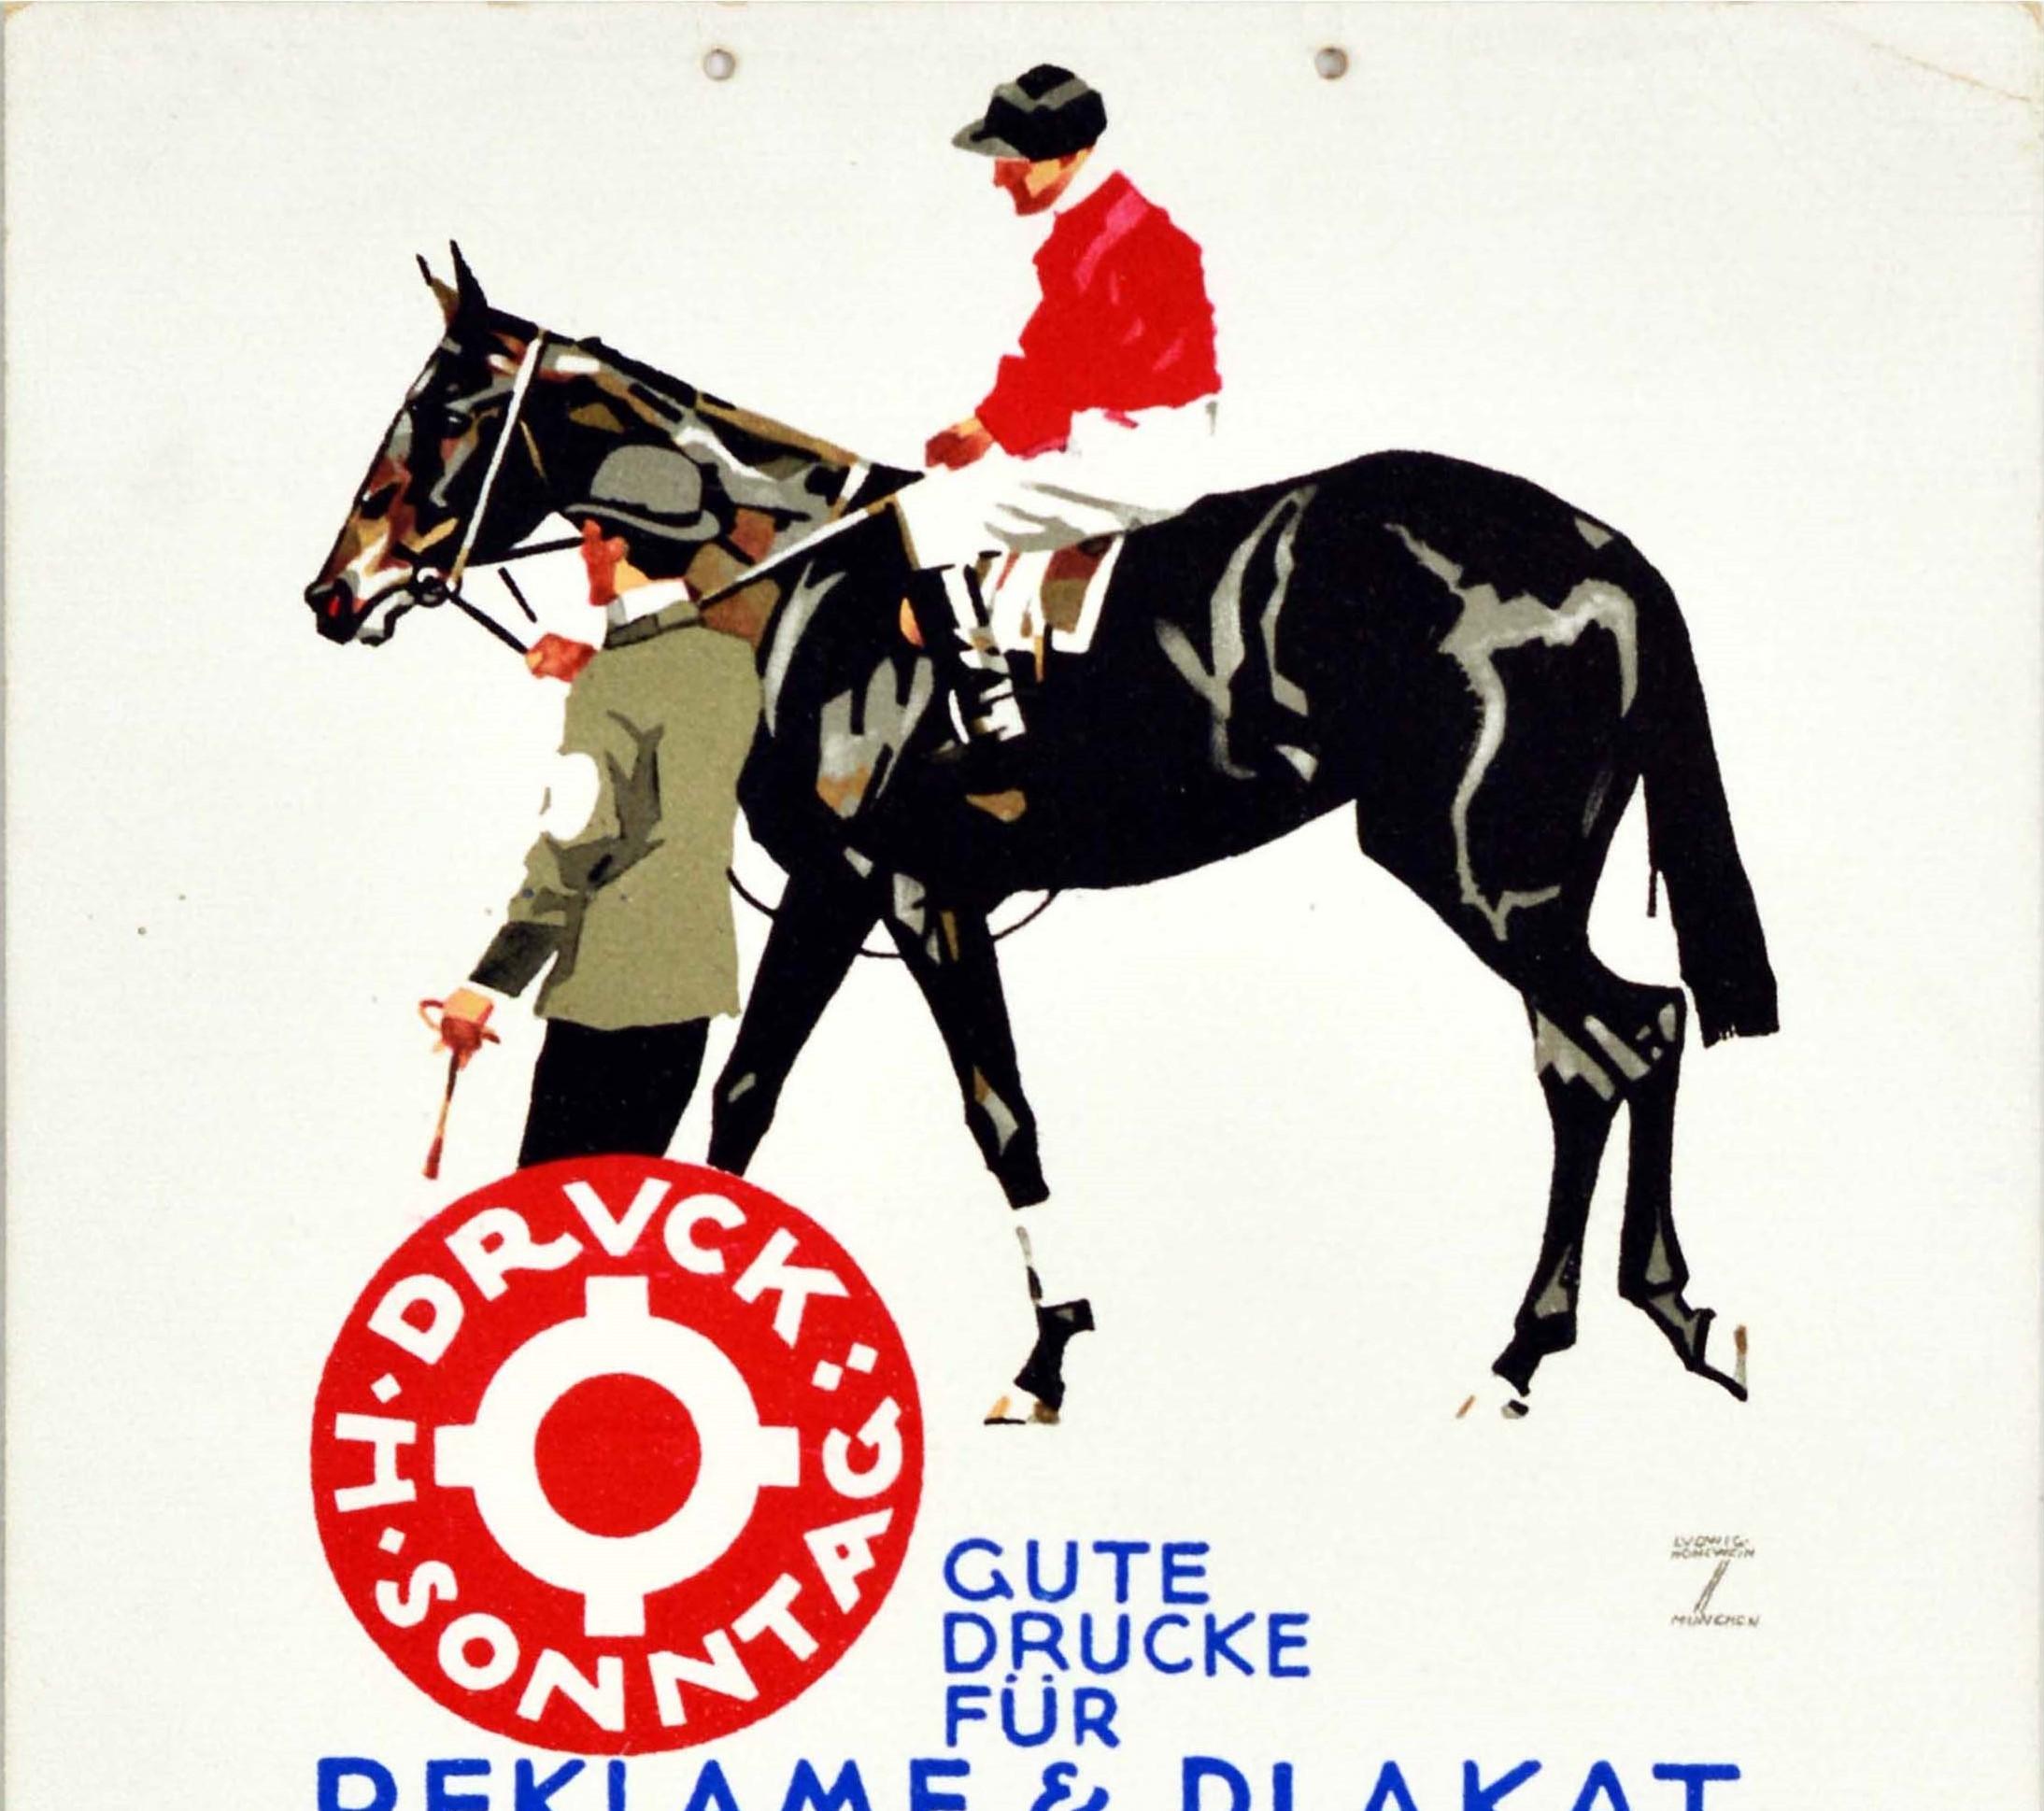 Original vintage advertising poster featuring artwork by the notable German poster artist Ludwig Hohlwein (1874-1949) for H. Sonntag Druck printing company depicting a rider dressed in smart red and white jockey outfit being led on a black horse by